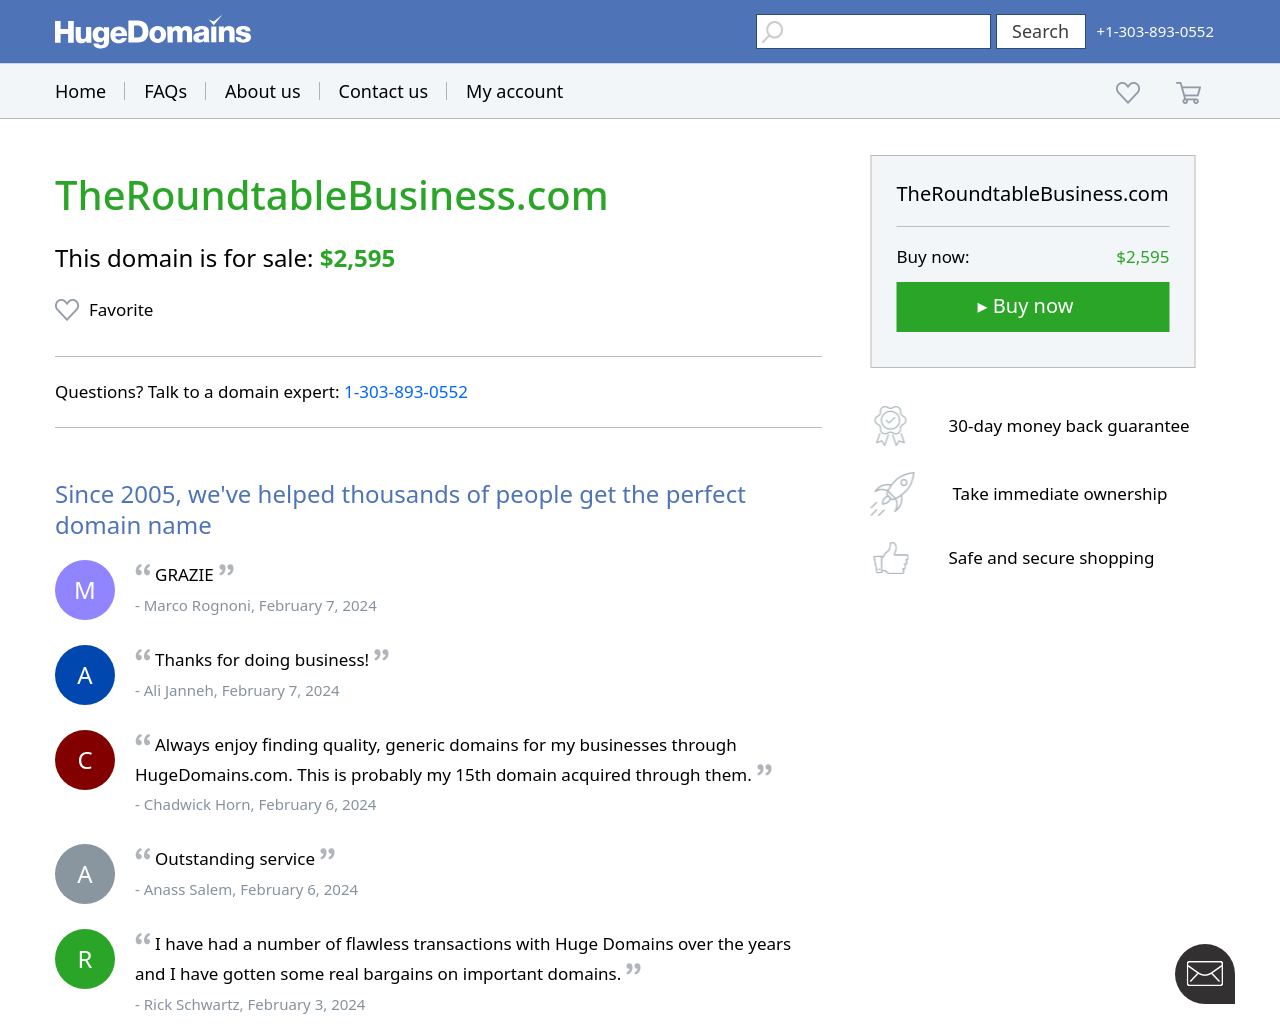 theroundtablebusiness.com